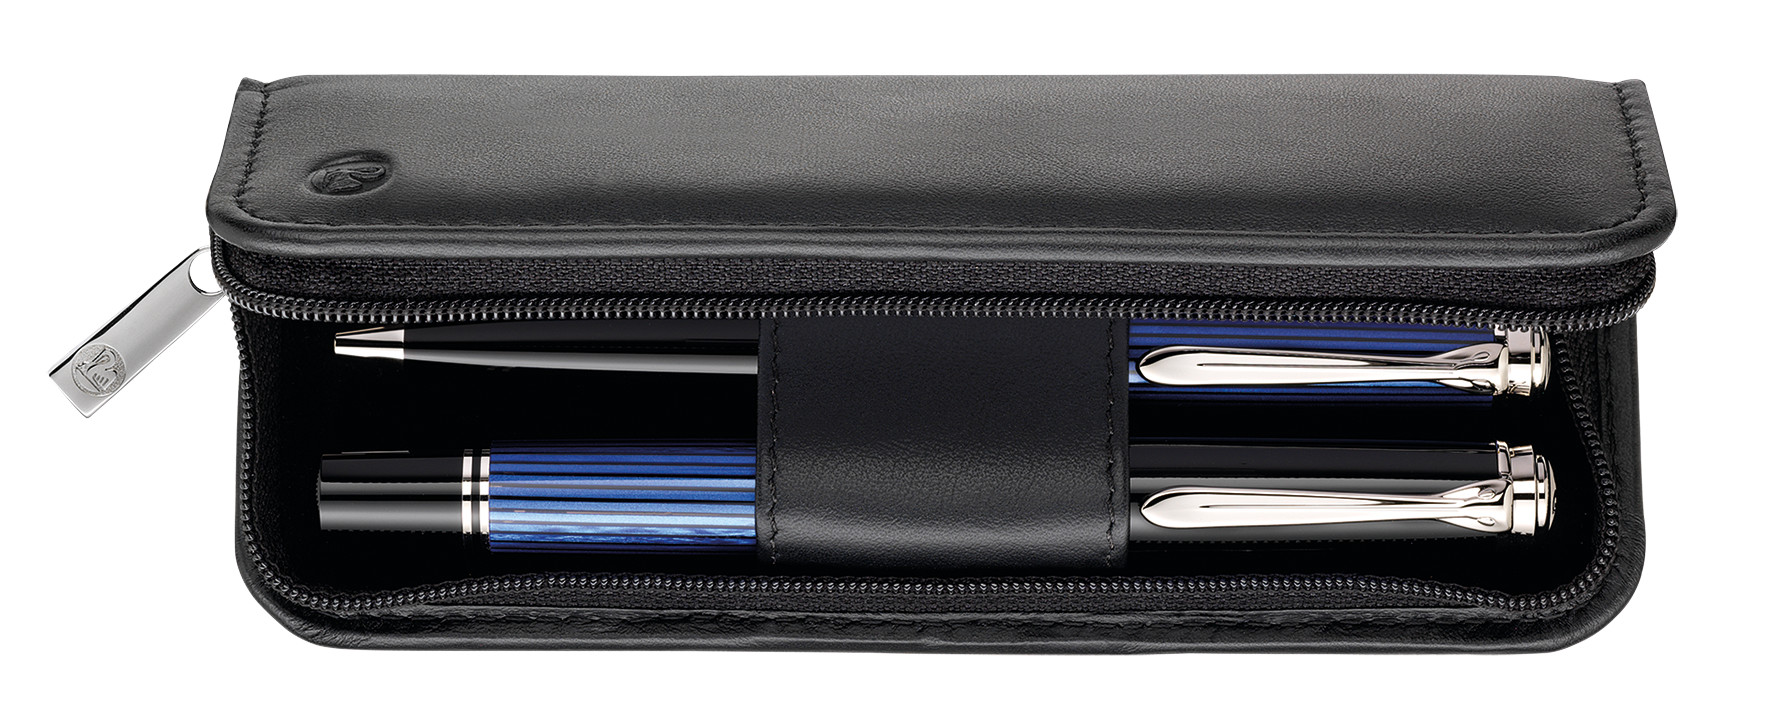 Pelikan Writing Instrument Case Made of Napa leather TGX2N for Two Writing Instruments, Black